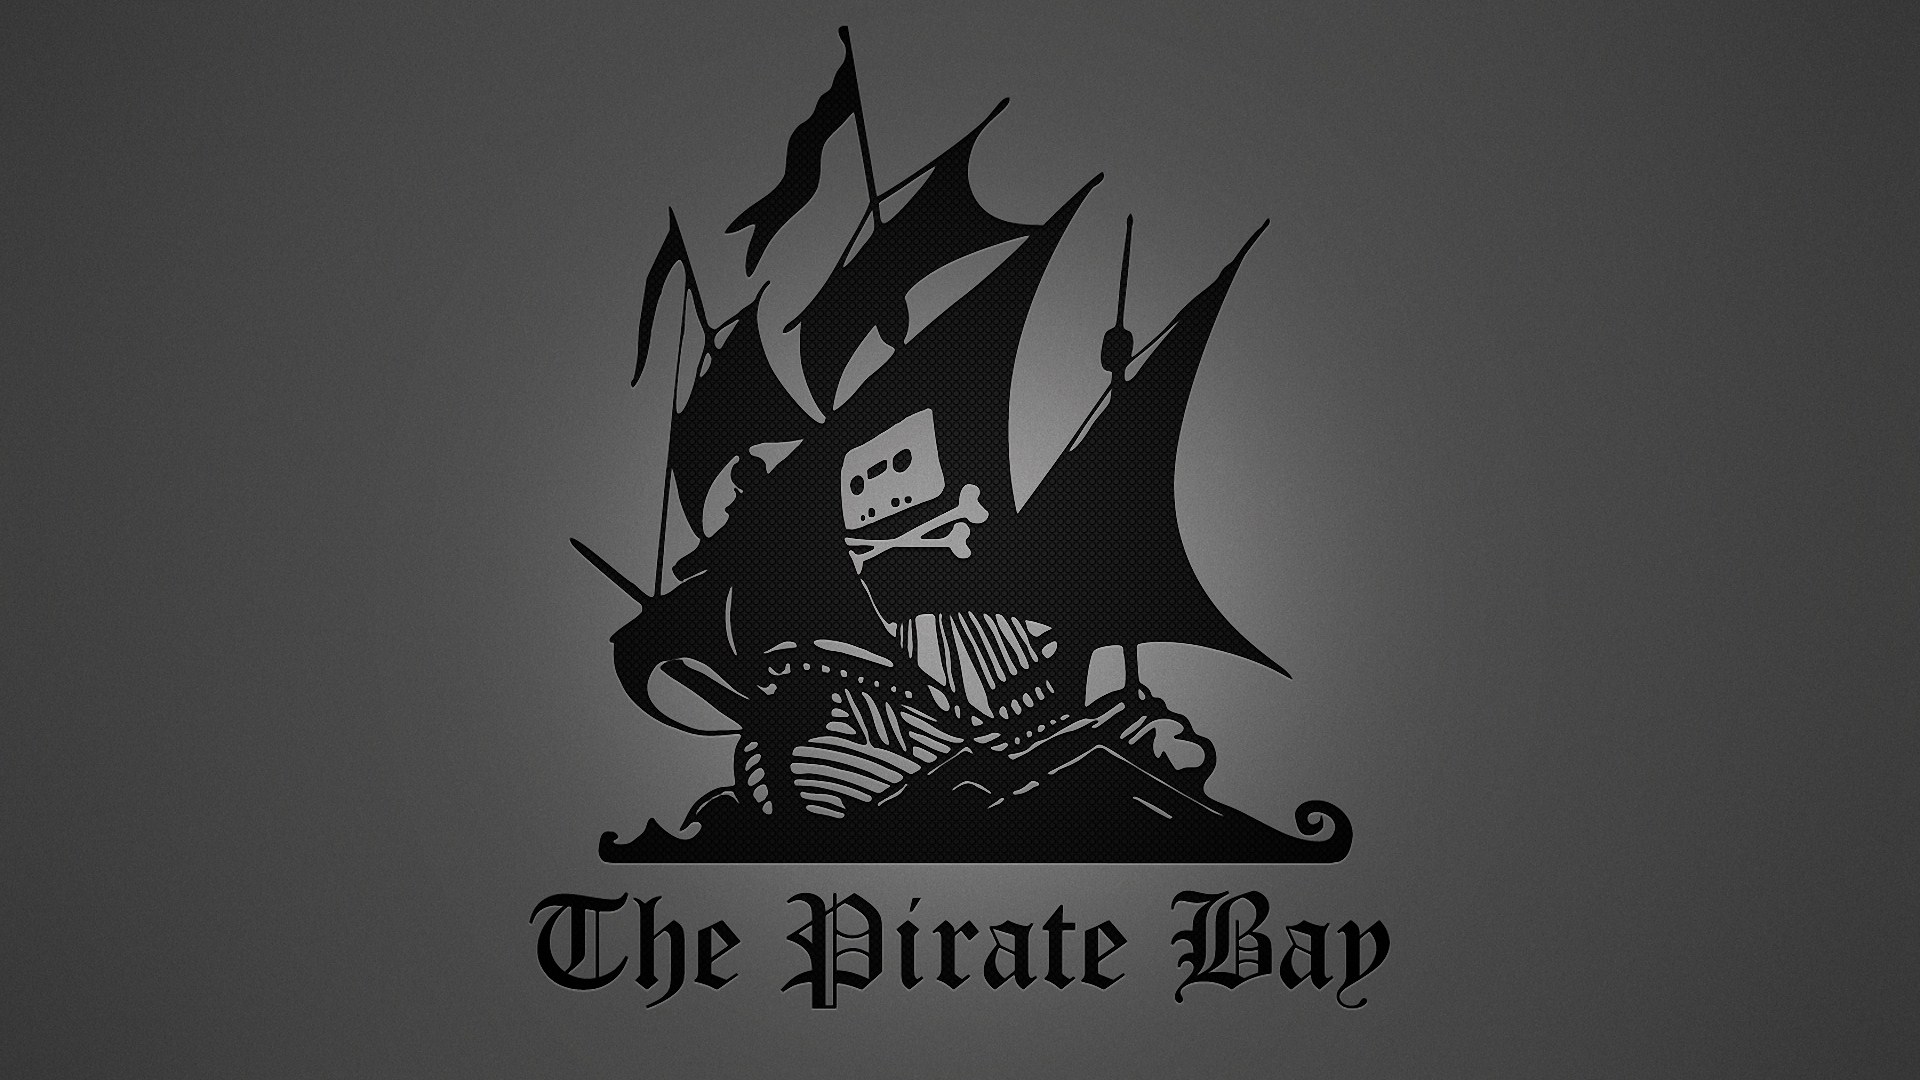 Telstra: First Aussie ISP to block subscriber access to The Pirate Bay; defeated in seconds